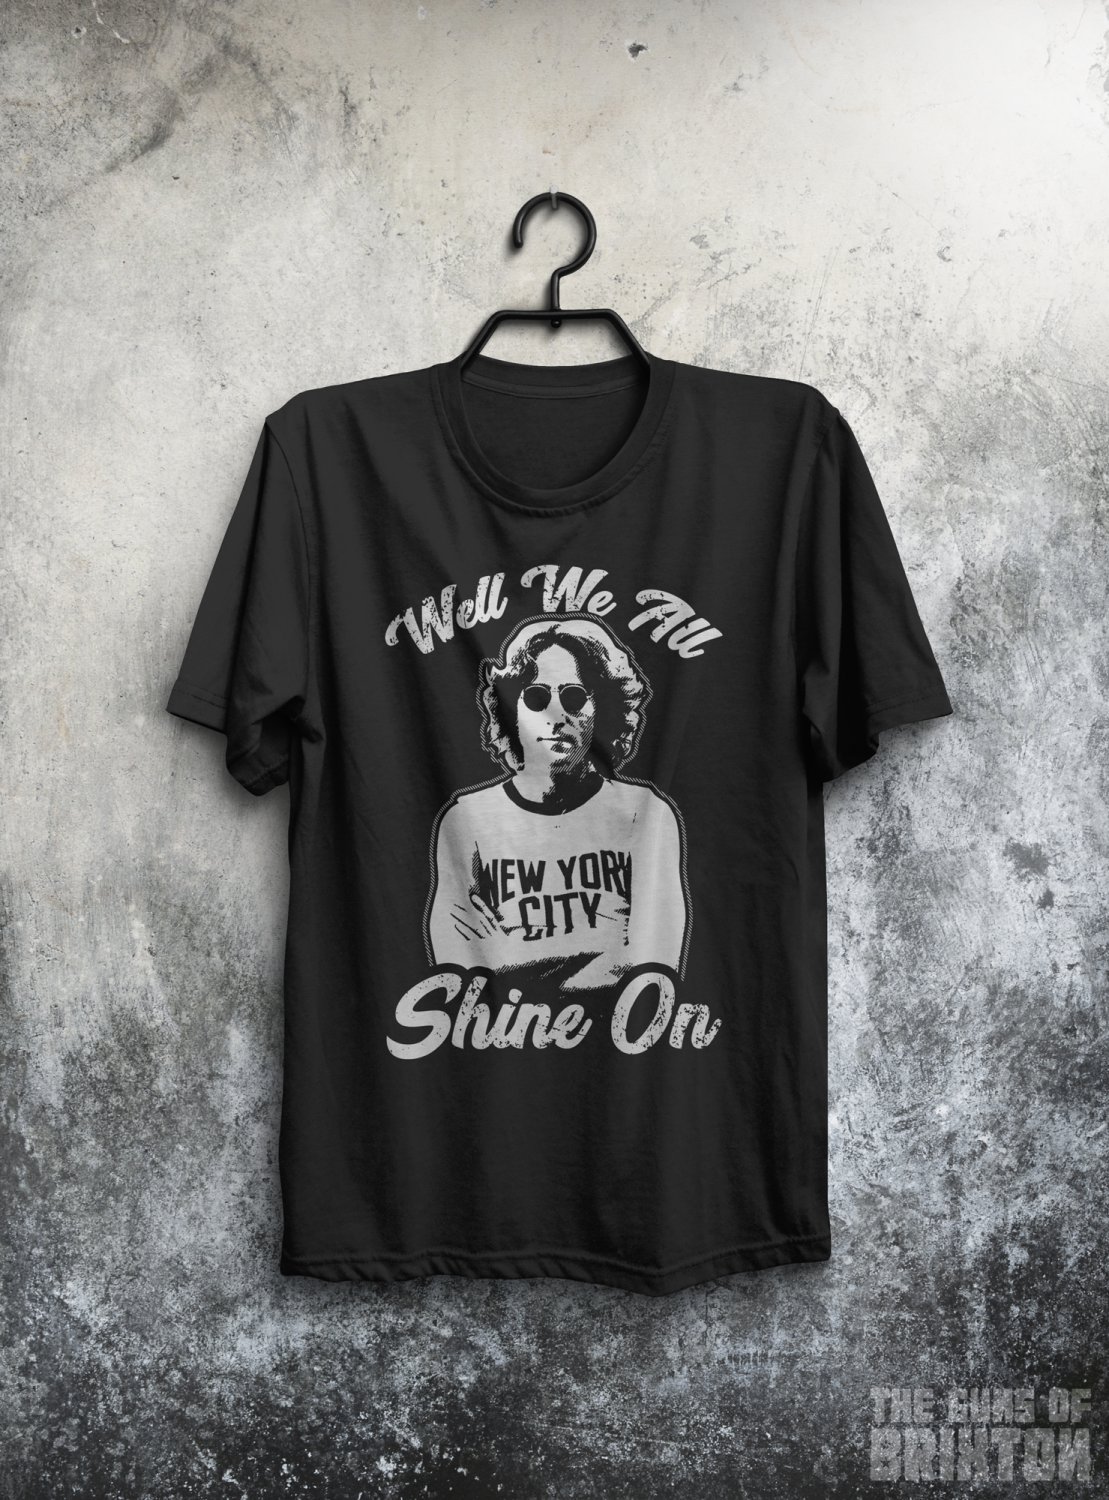 Instant Karma Inspired By John Lennon We All Shine On Adults T-Shirt All Sizes Cols